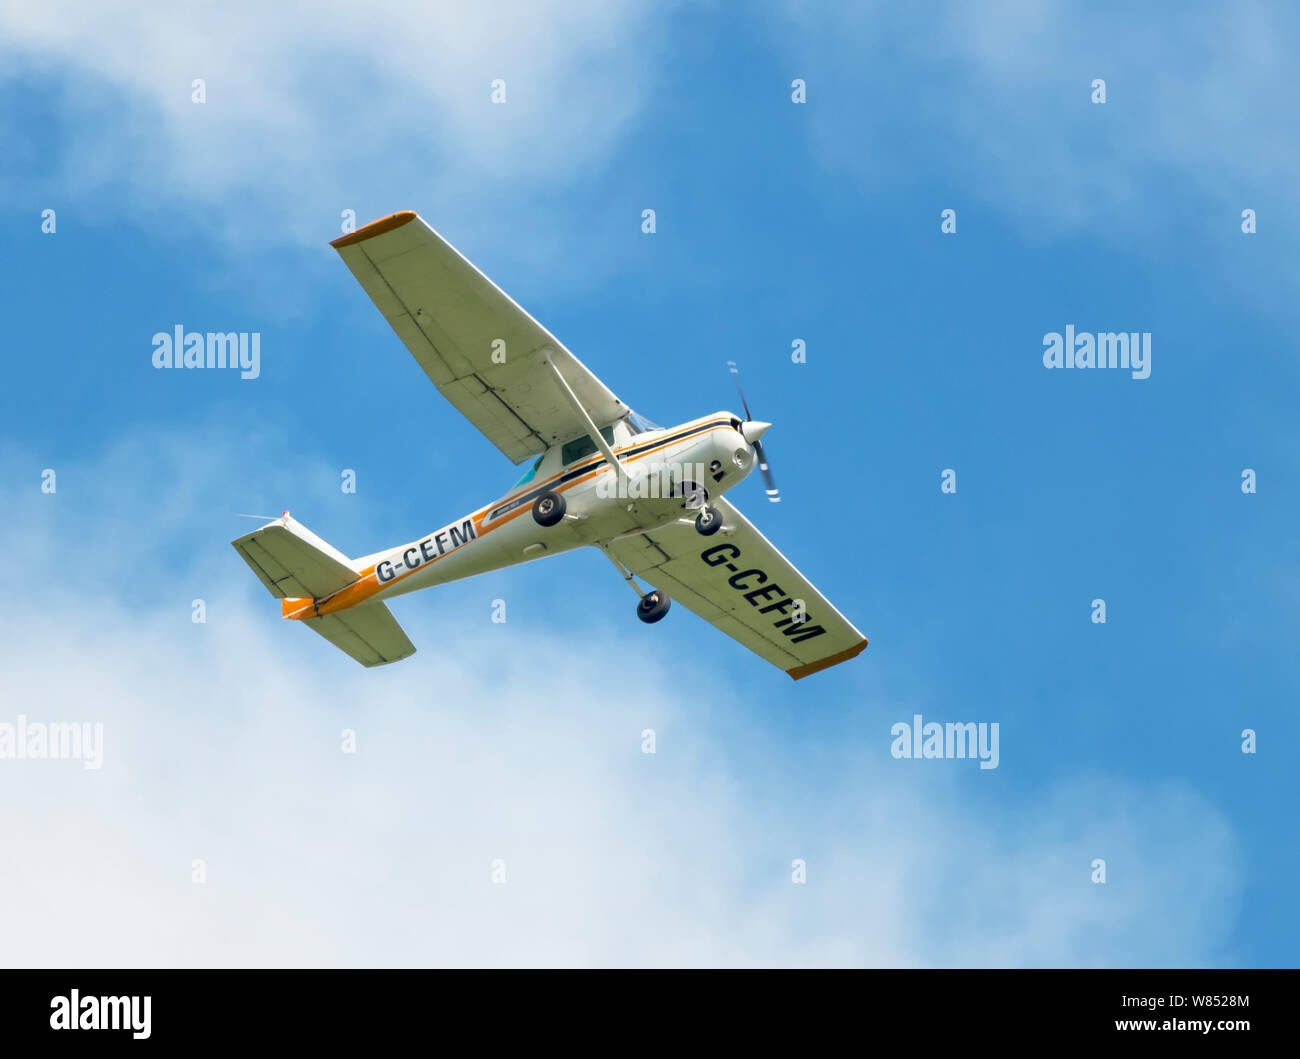 A Cessna 152 in flight and pictured against a blue sky Stock Photo